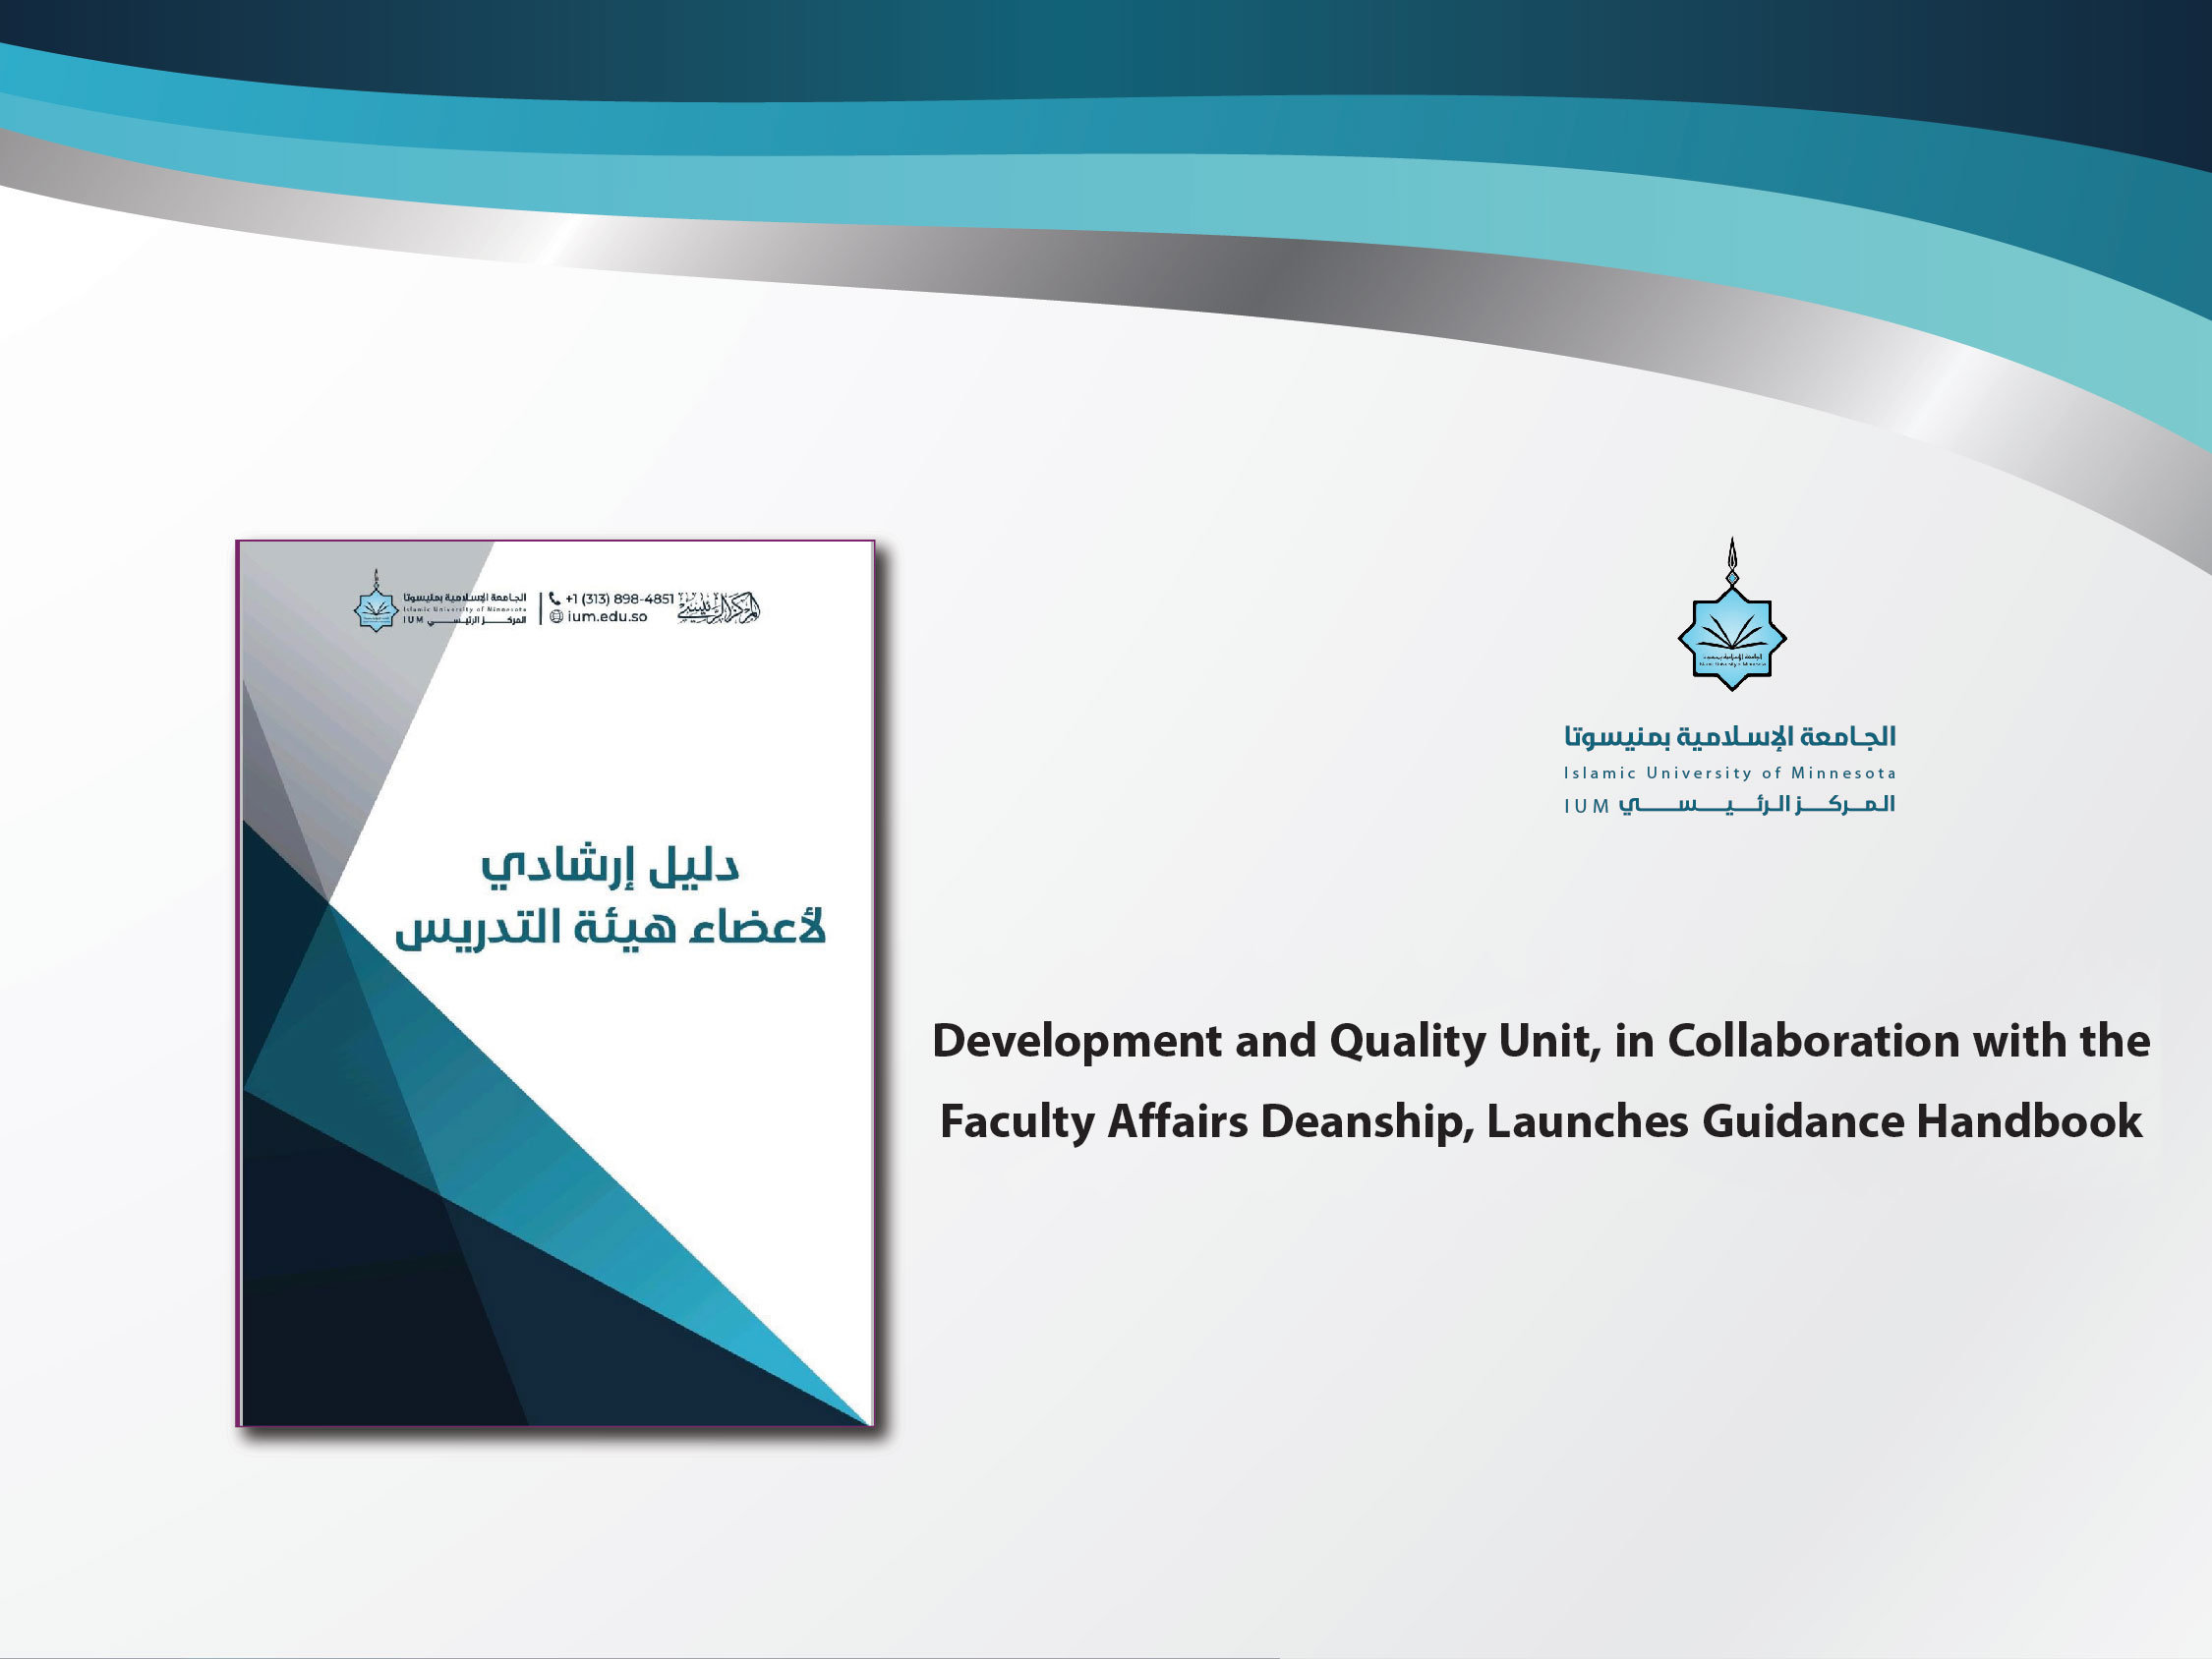 Development and Quality Unit, in Collaboration with the Faculty Affairs Deanship, Launches Guidance Handbook